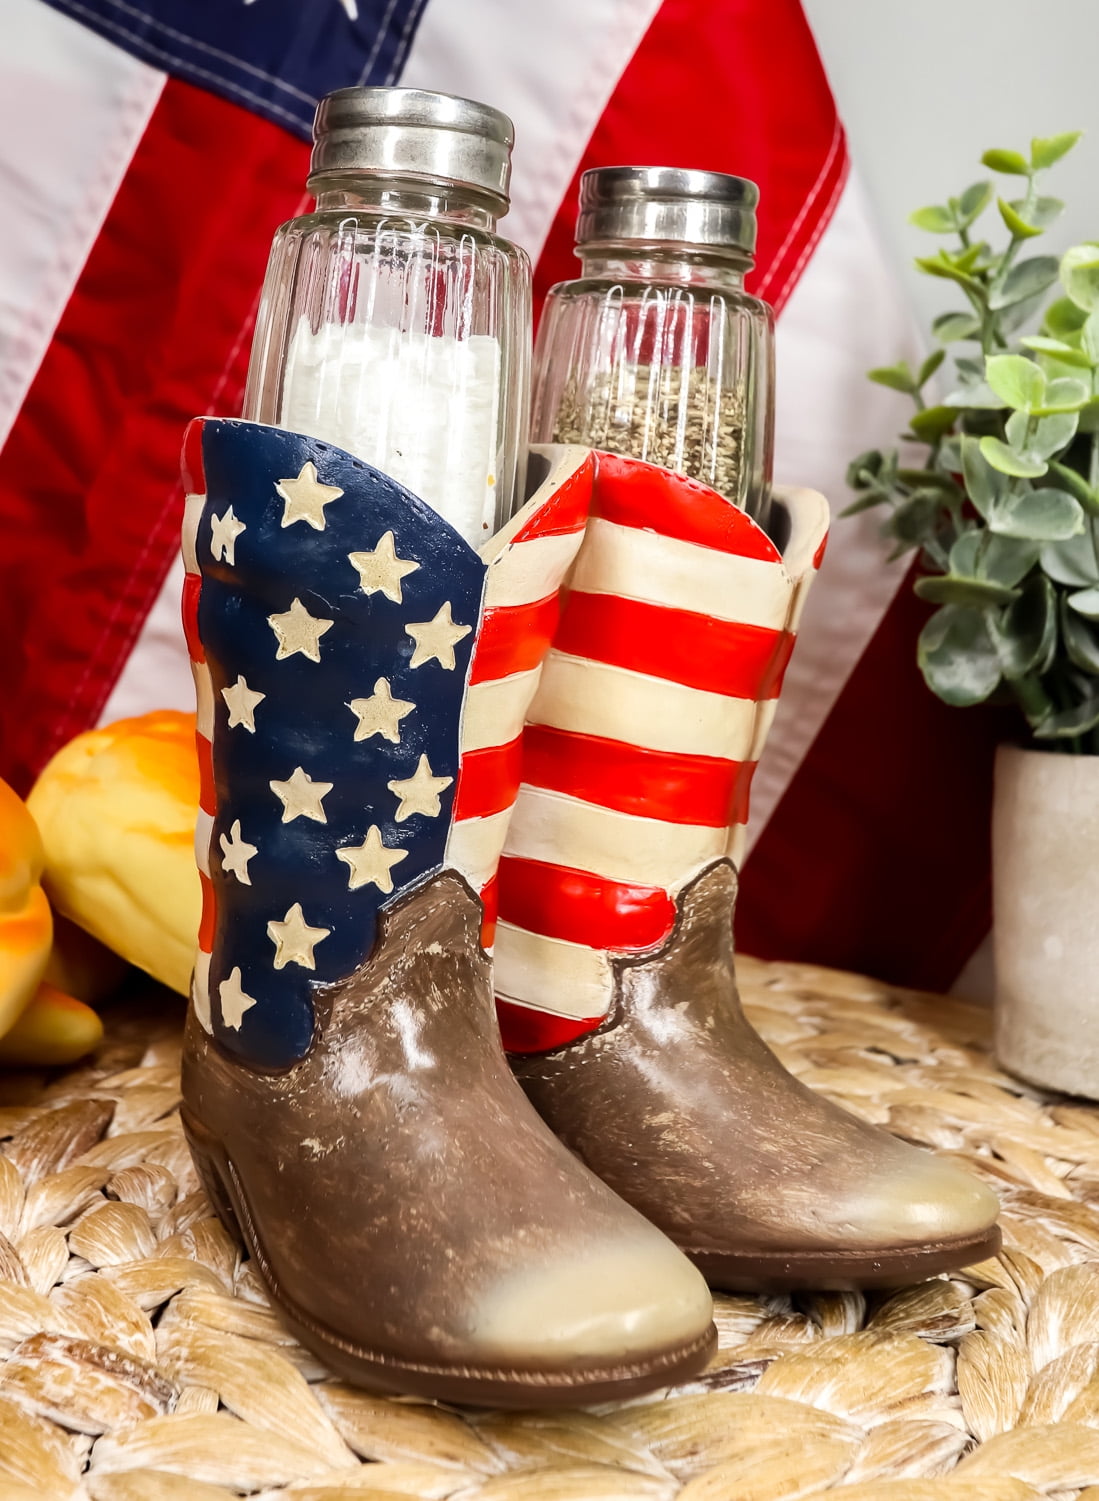 Ebros Western Cowboy Or Cowgirl Texas Flag Boots Salt and Pepper Shakers Set with Decorative Resin Display Holder Figurine and Glass Shakers Kitchen Two Step Spice Decor 